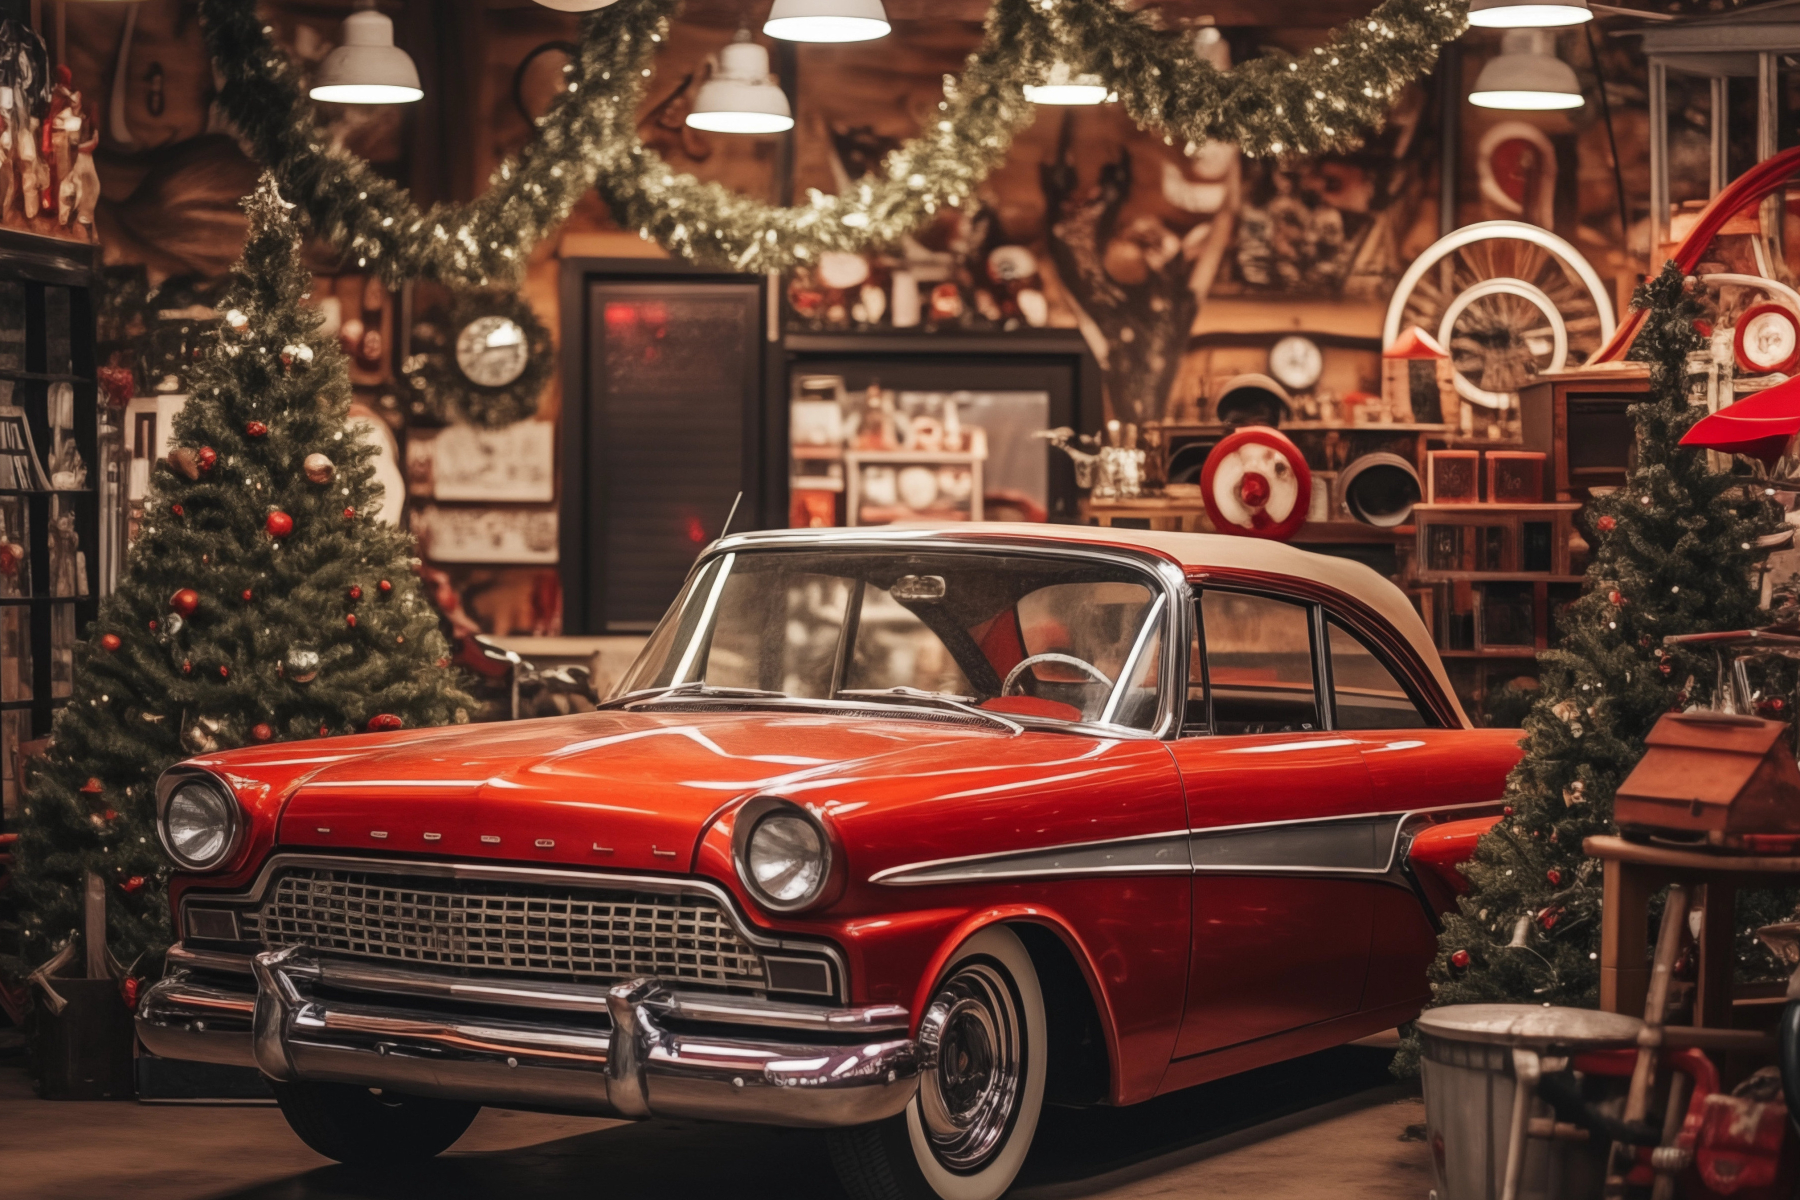 The 12 Days of Car Maintenance: A Christmas Countdown